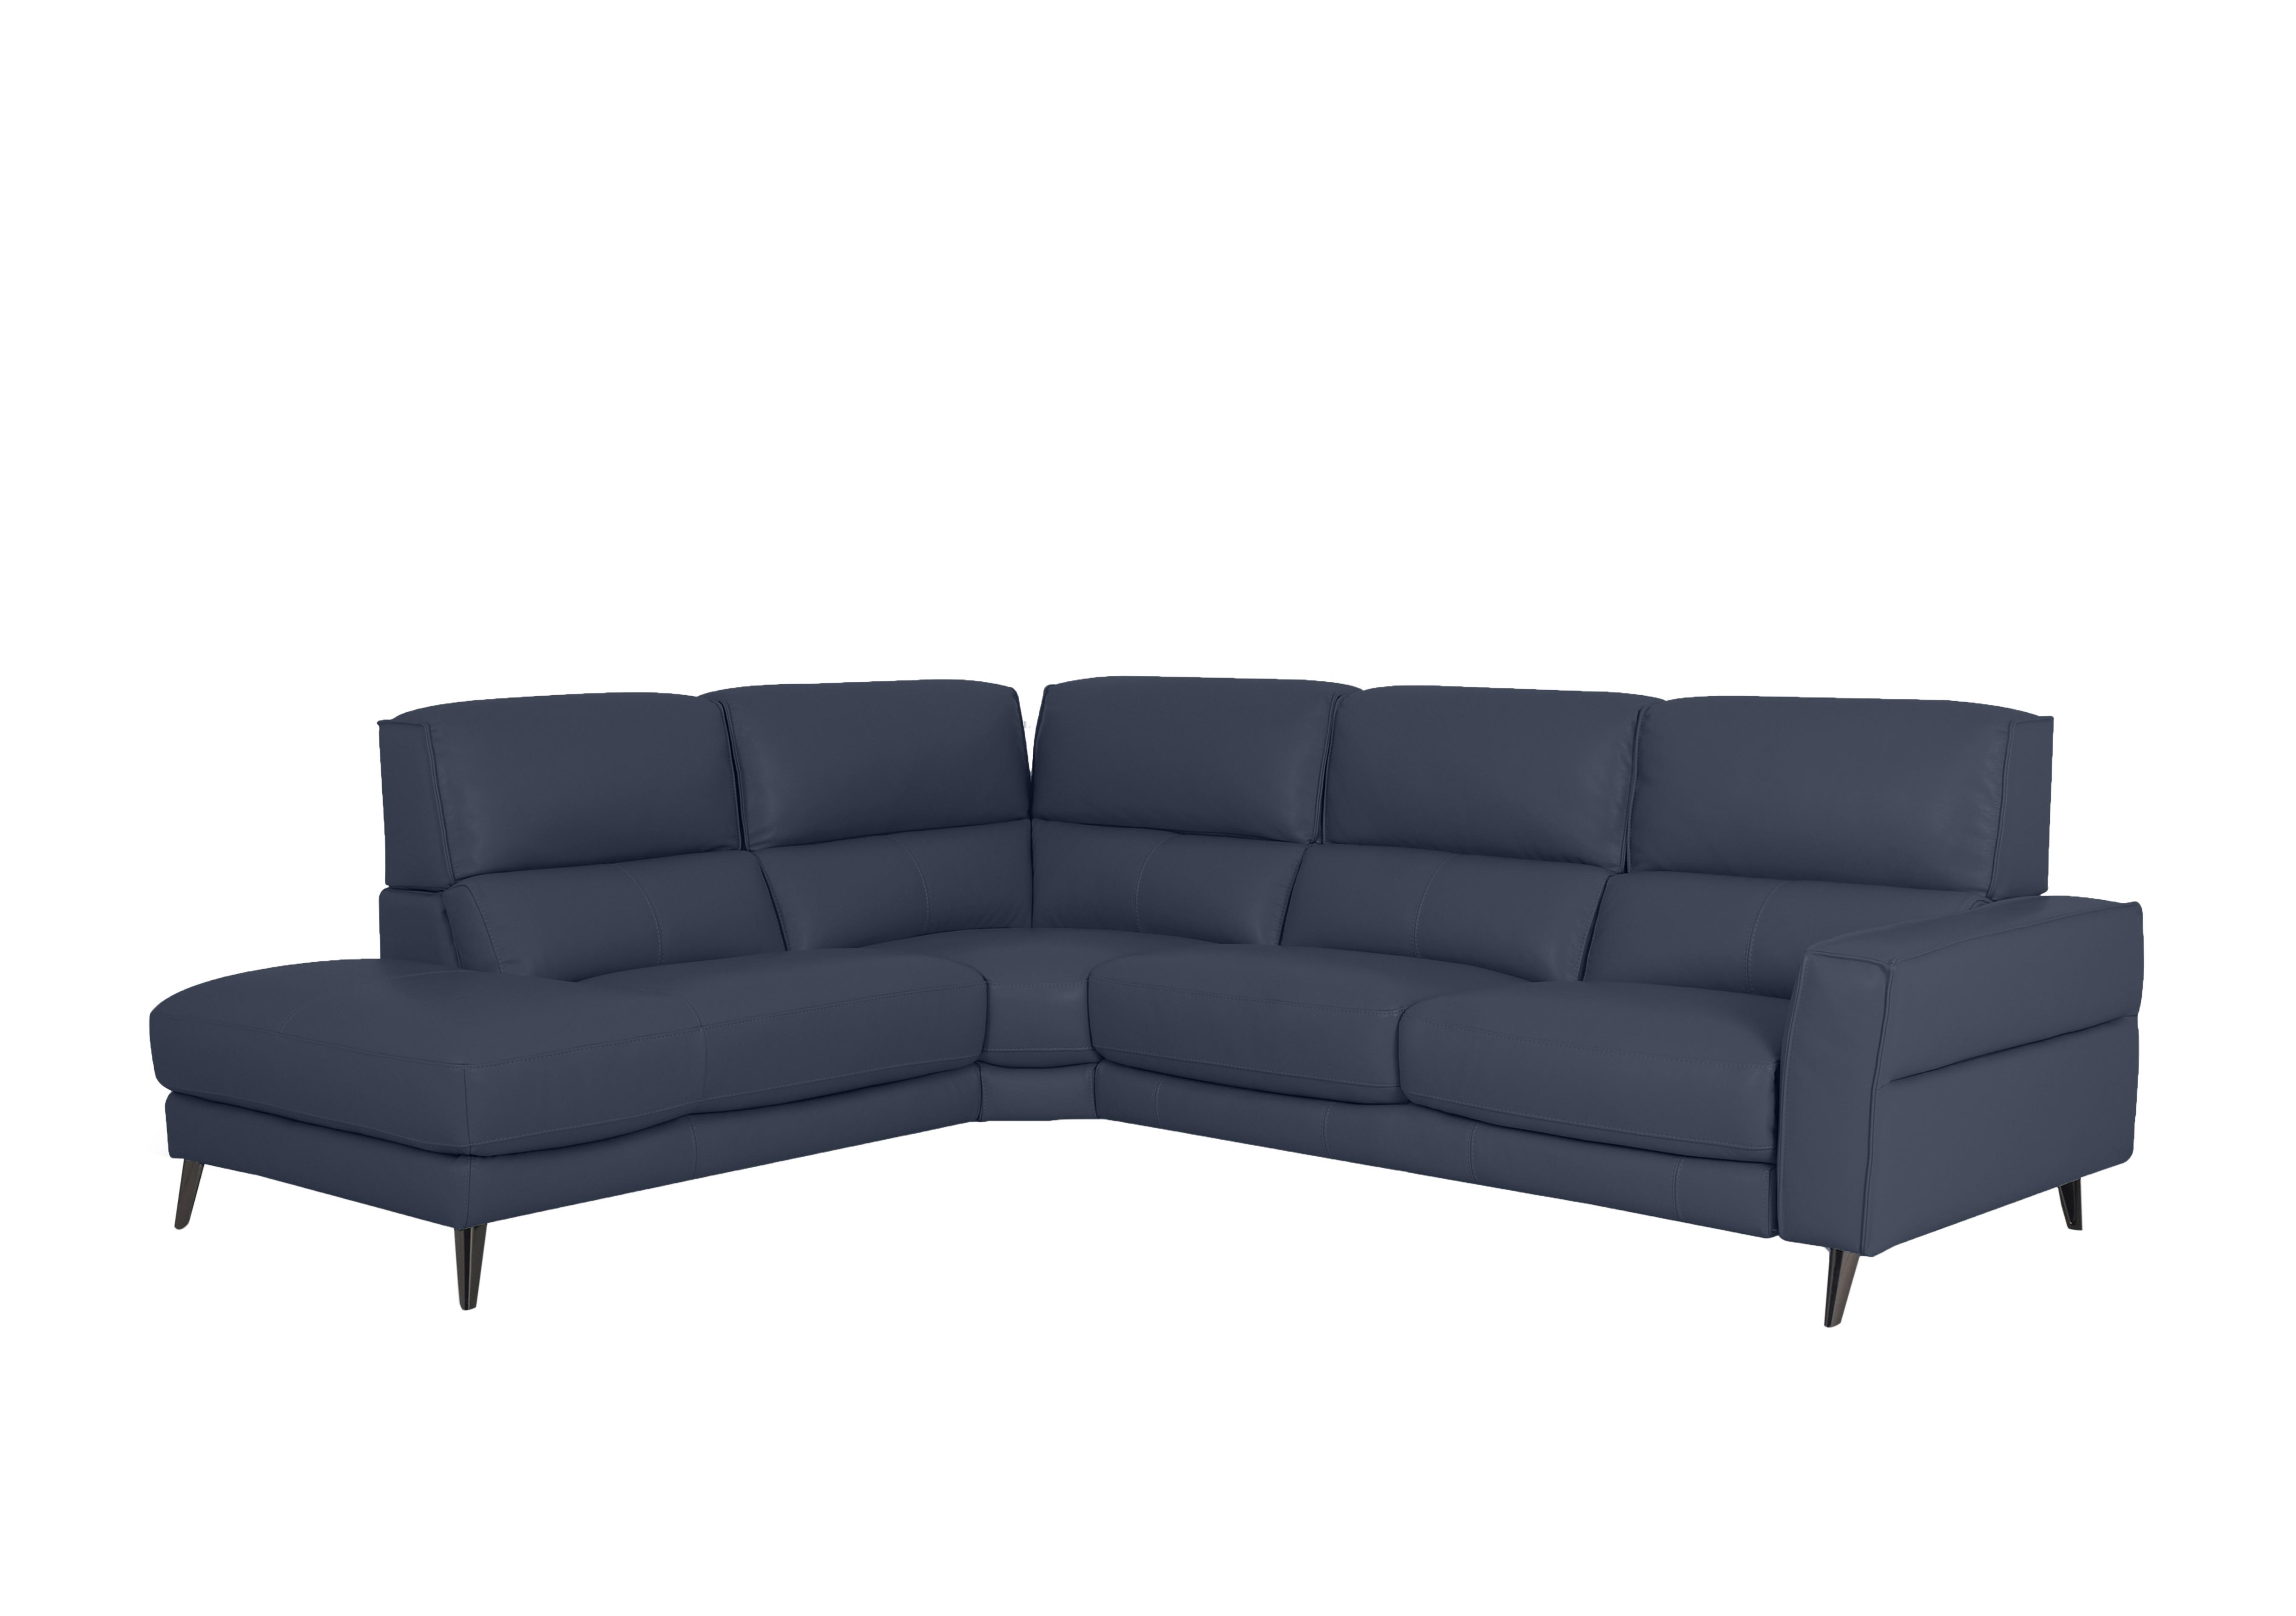 Axel Leather Chaise End Sofa in Bv-313e Ocean Blue on Furniture Village